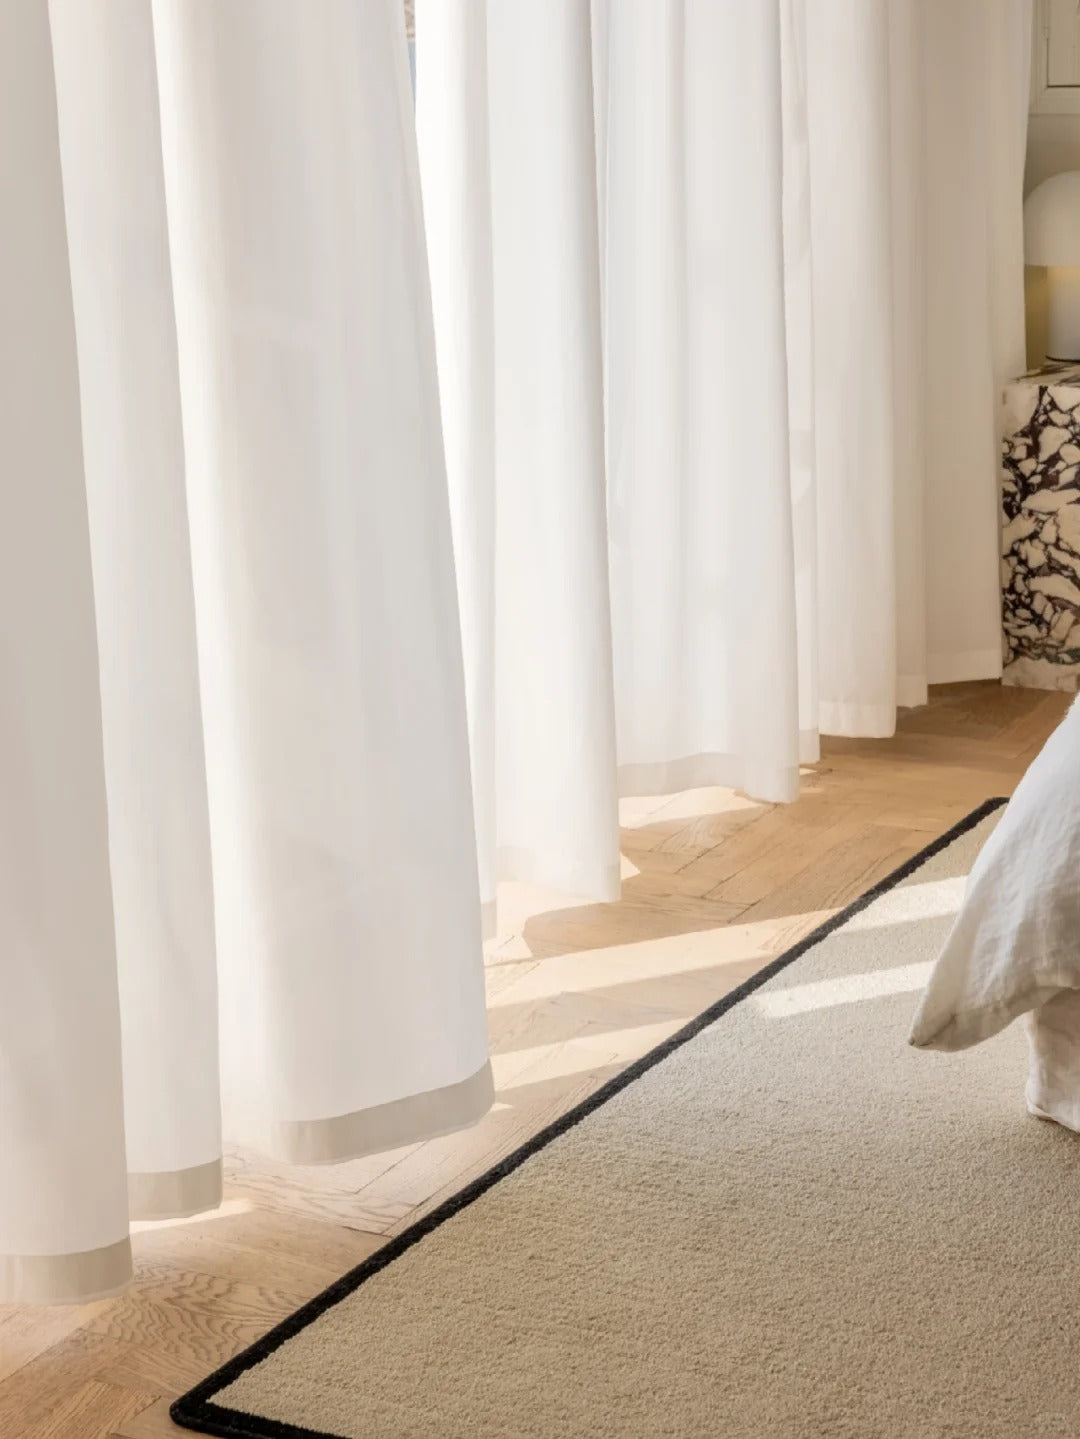 Elegant white sheer curtains in a sunlit room providing privacy and a soft ambiance, perfect for sophisticated home decor and sunlight protection